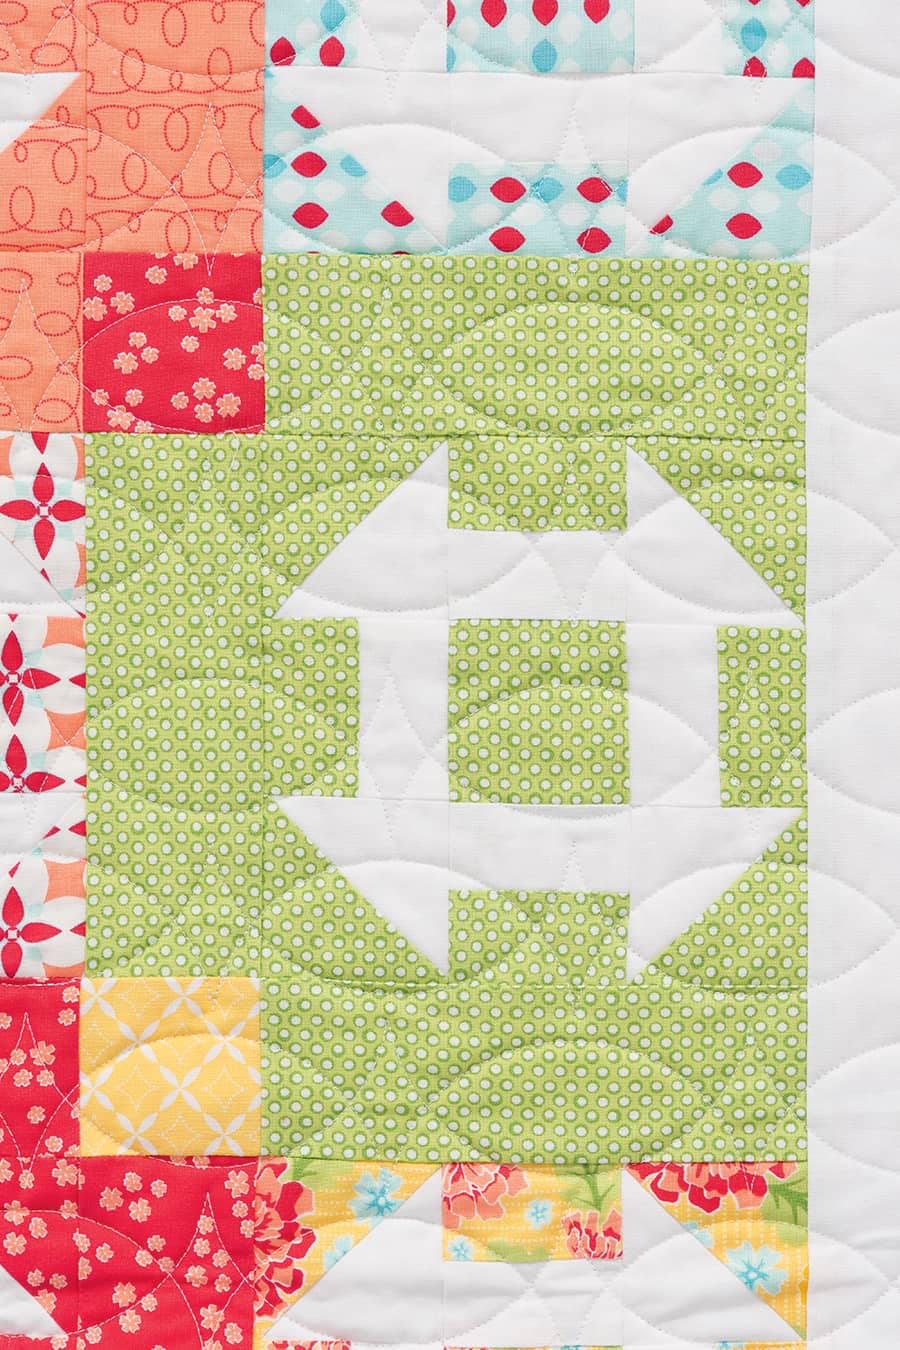 Free pattern: Summer Dash- zoomed in image of quilt pattern